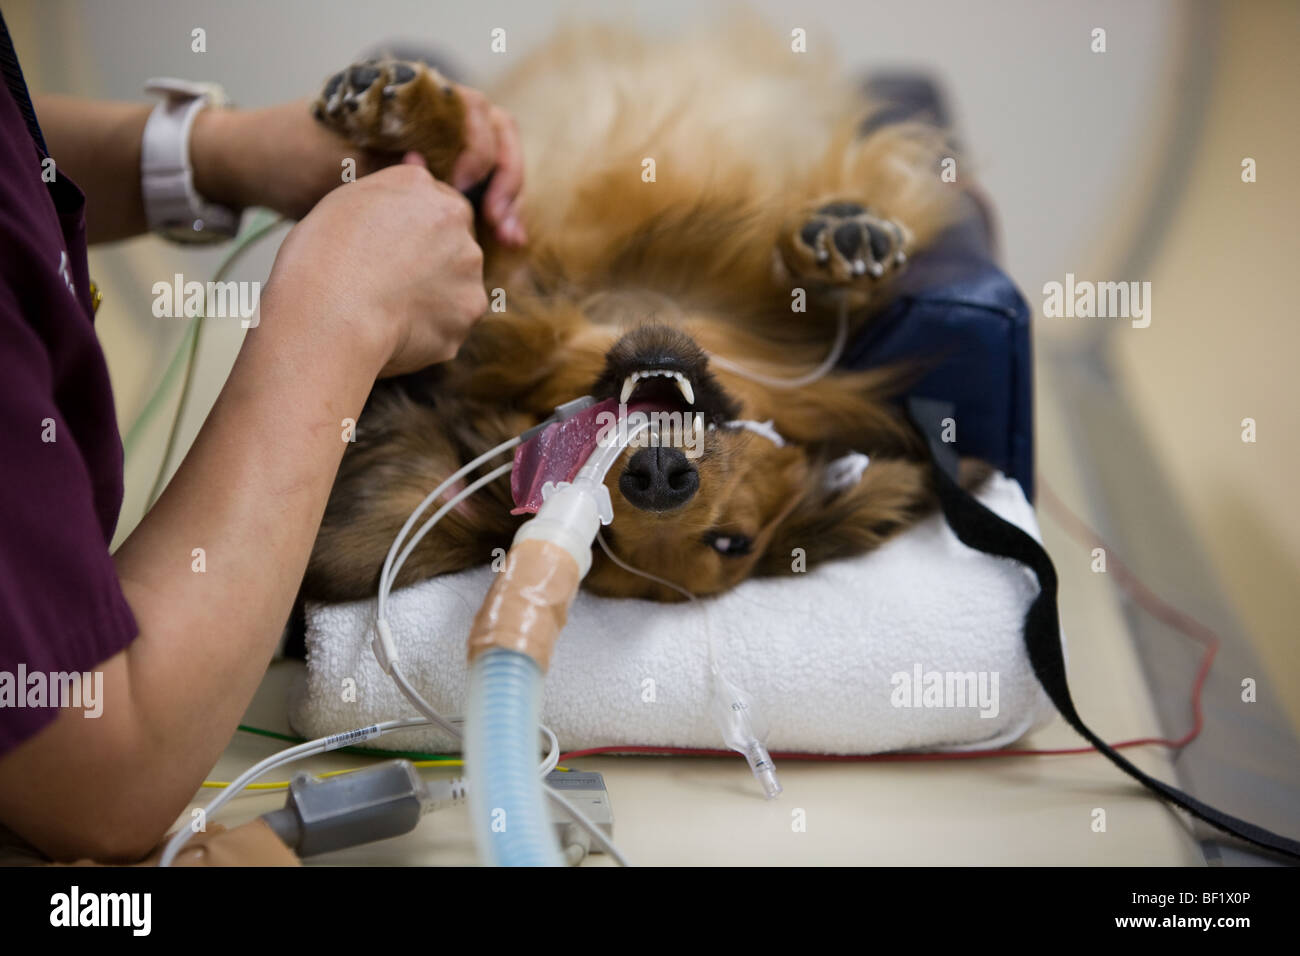 dachshund dog prepares to undergo a CT scan at veterinary clinic, Japan. Stock Photo